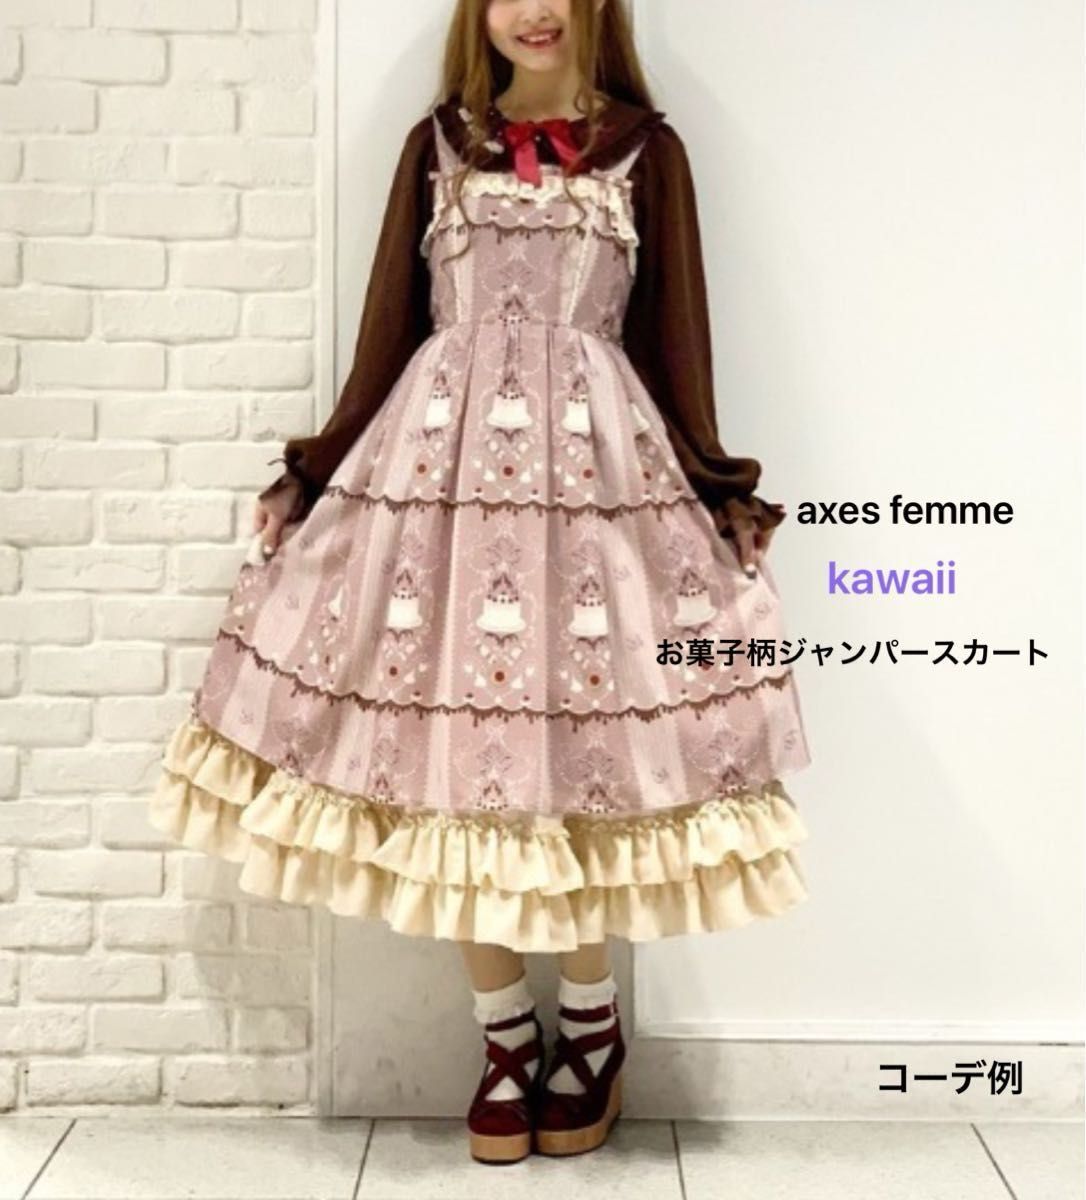 axes femme kawaii ロンドントイズジャンスカ 生成り｜PayPayフリマ